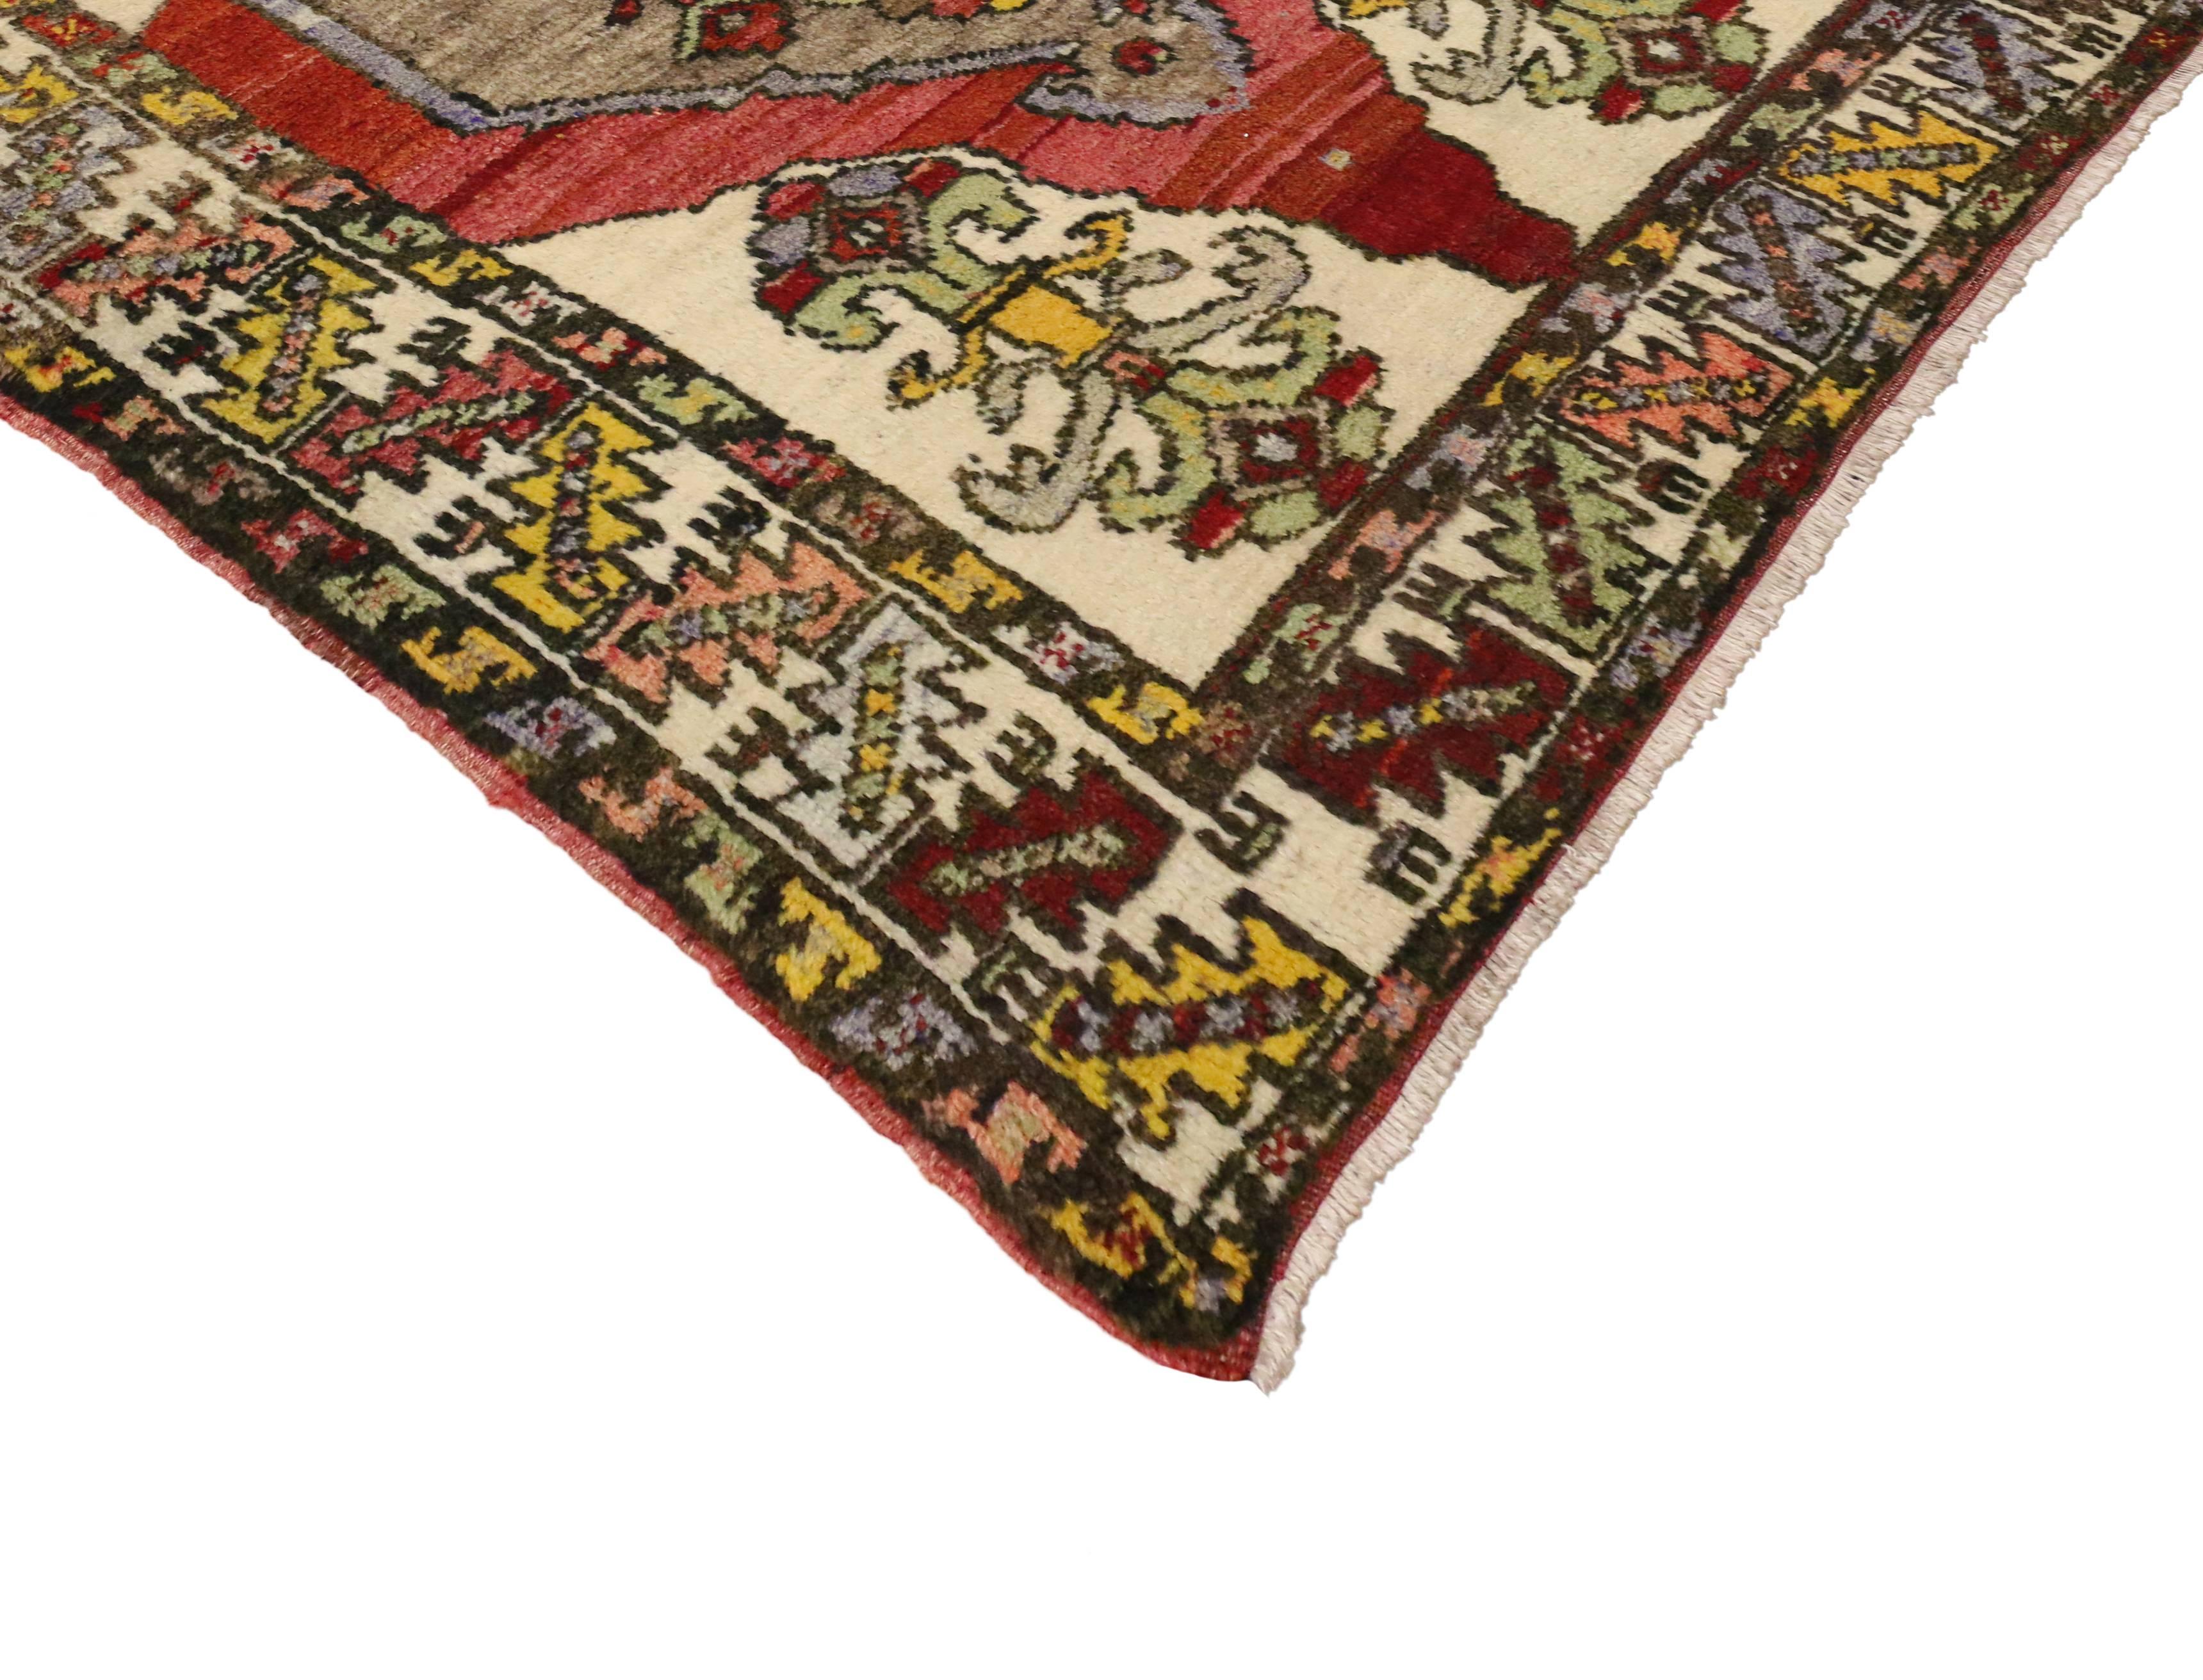 50163 Vintage Turkish Oushak Rug with Modern Traditional Style 03'01 x 04'07. Warm and inviting with a timeless design, this hand-knotted wool vintage Turkish Oushak rug is poised to impress. The abrashed field features a concentric botanical